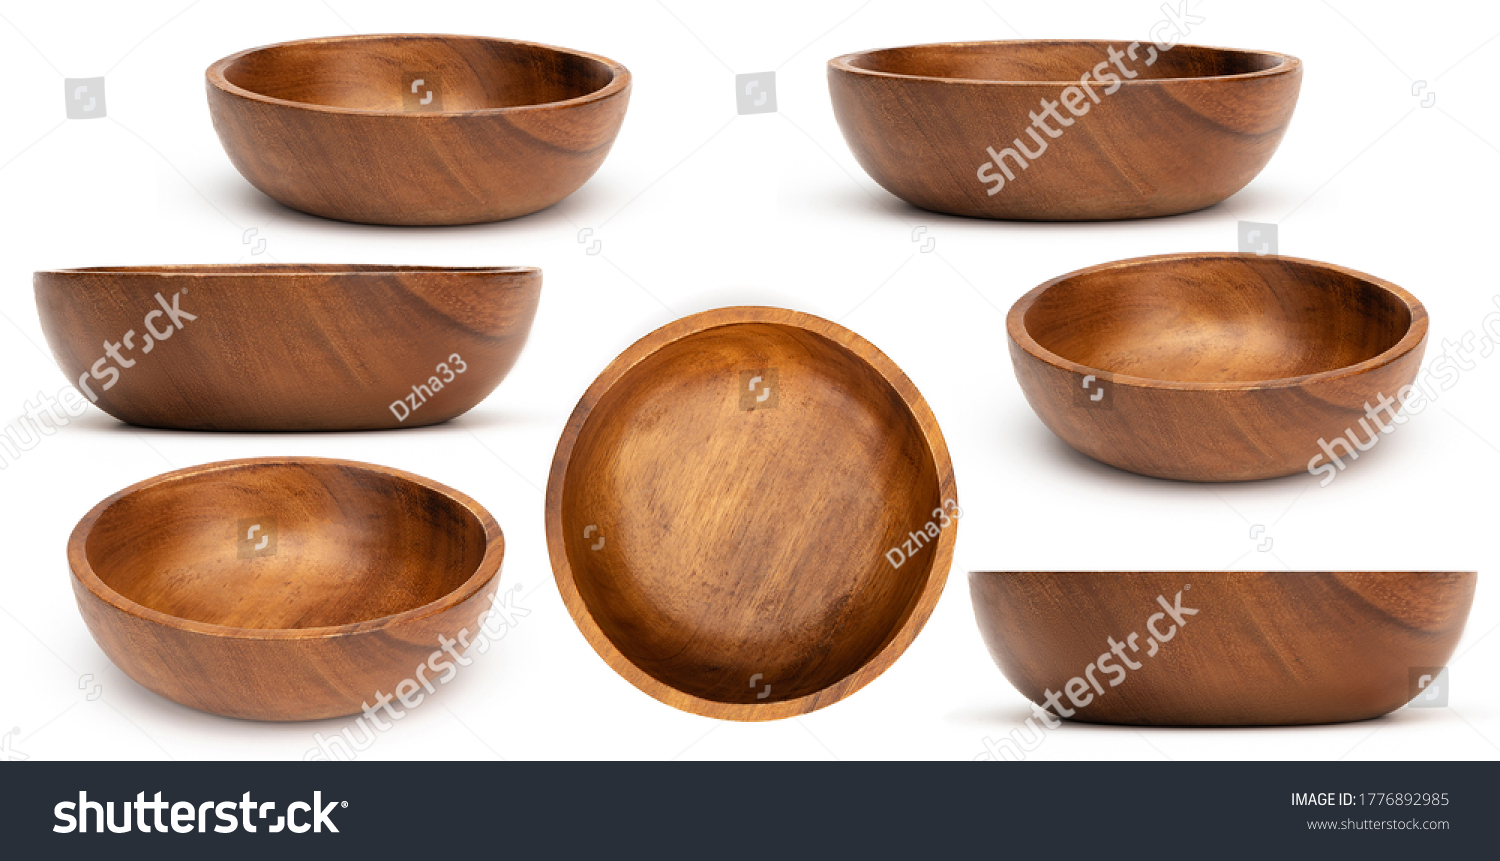 Empty wooden bowls isolated on white background. Set of wood bowls. Collection. #1776892985